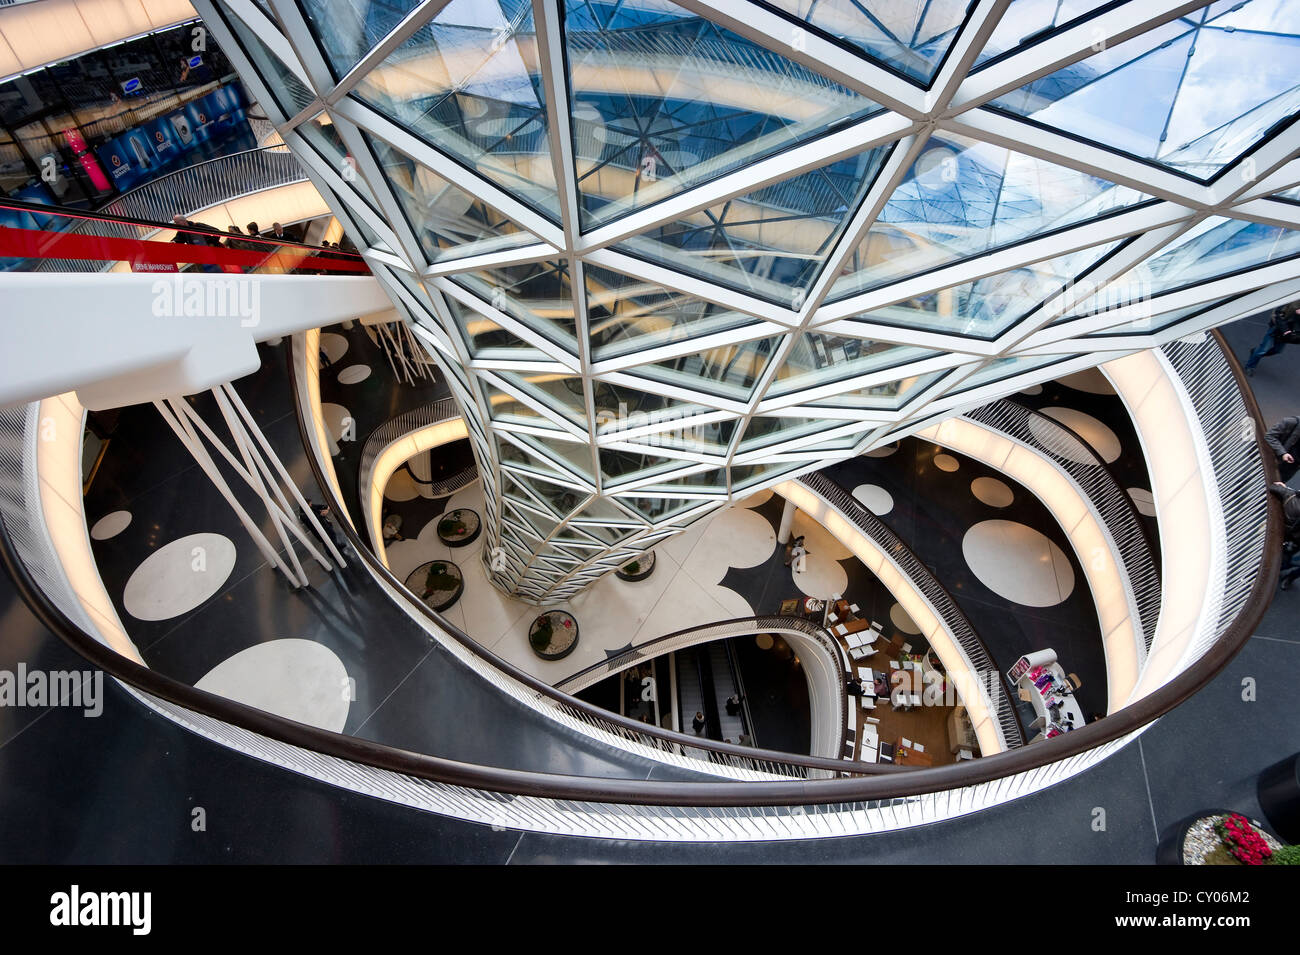 Shopping Centres Escalators High Resolution Stock Photography and Images -  Alamy